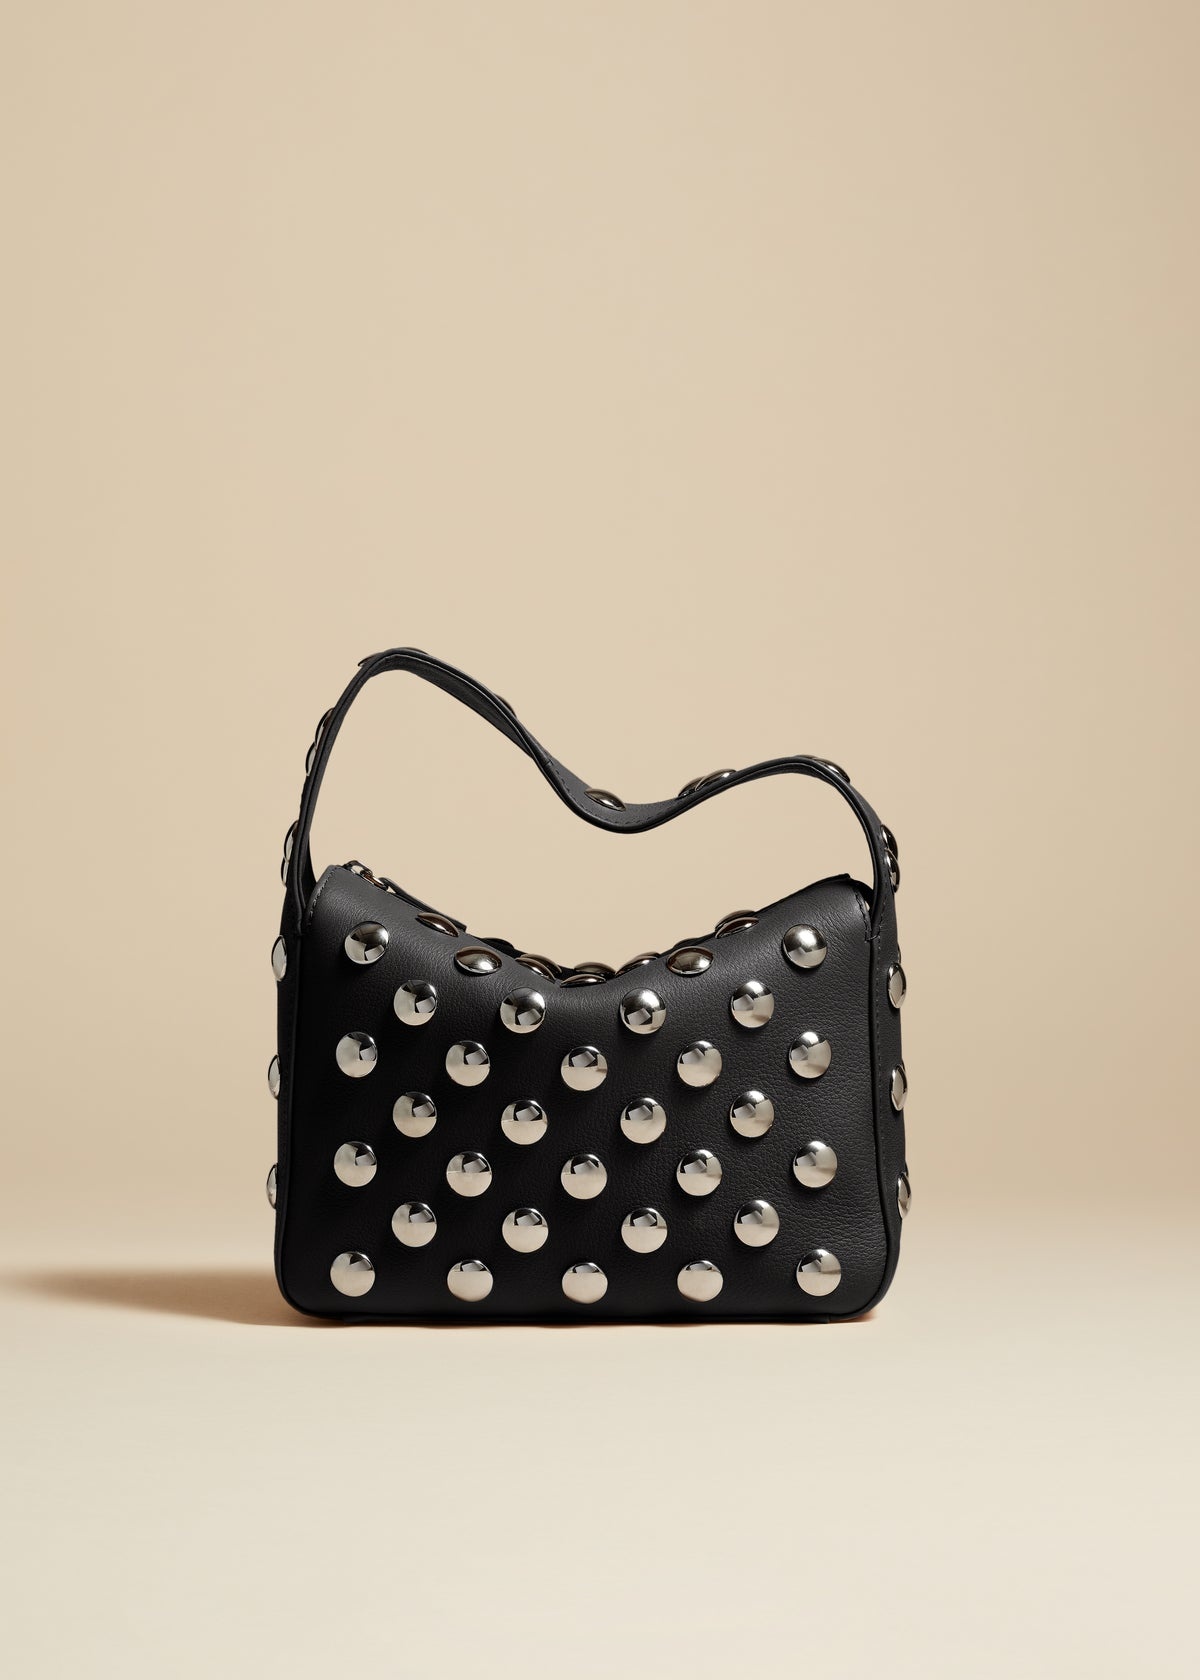 The Small Elena Bag in Black Leather with Studs - 1